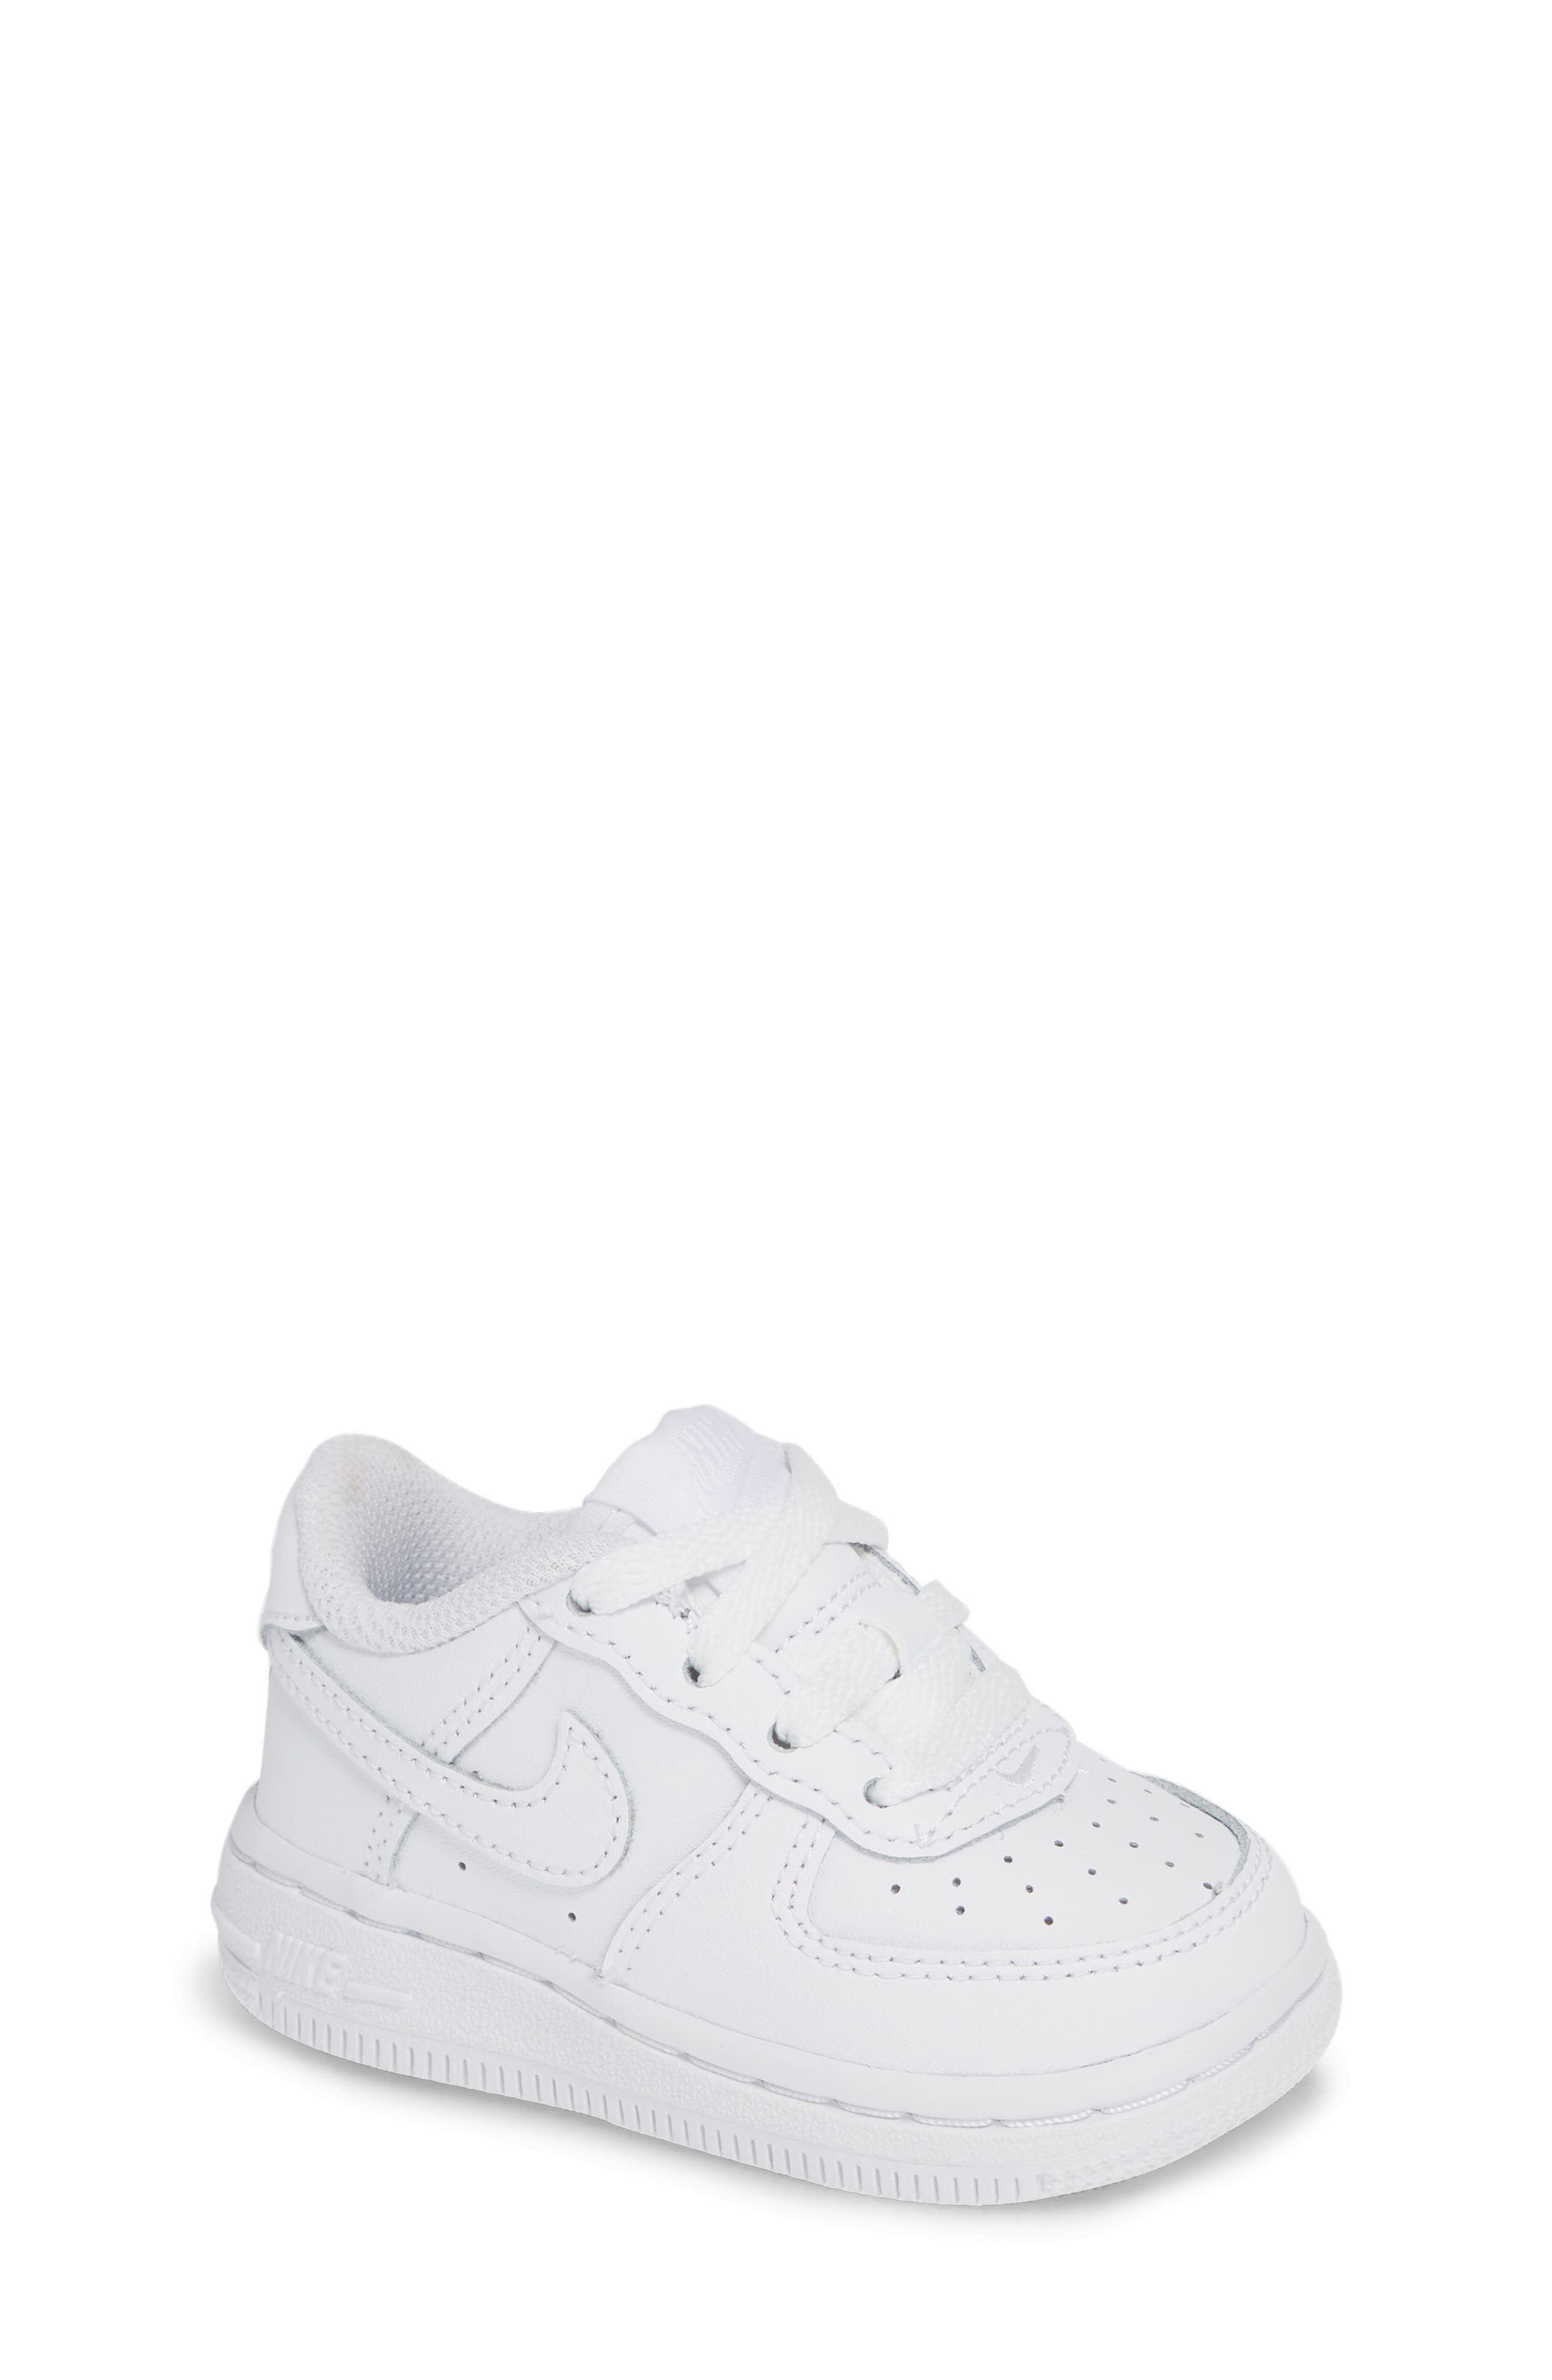 nike air force 1 infant size 5